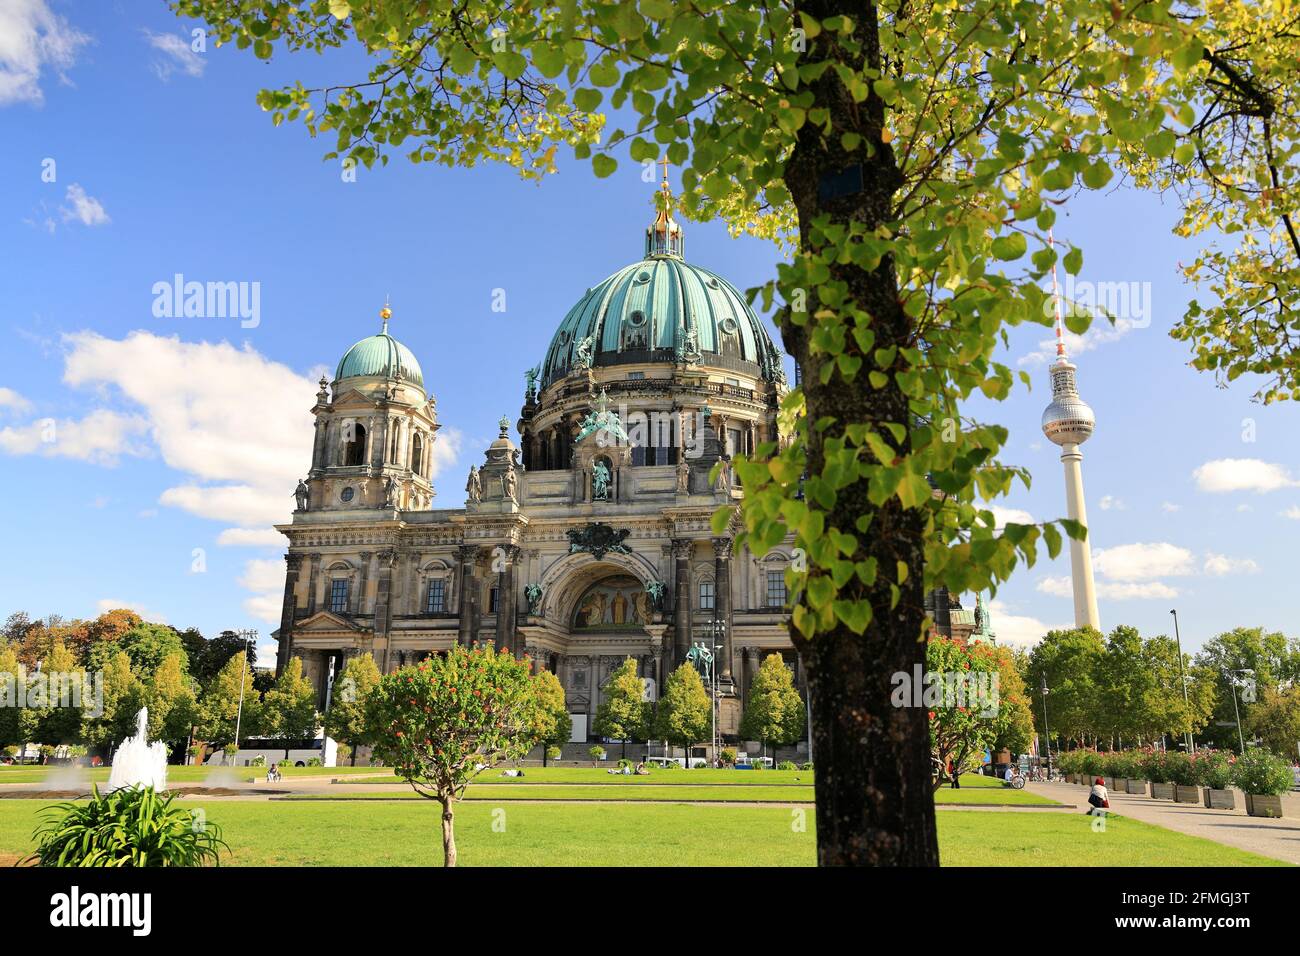 West facade of Berlin Cathedral by day. Germany, Europe. Stock Photo